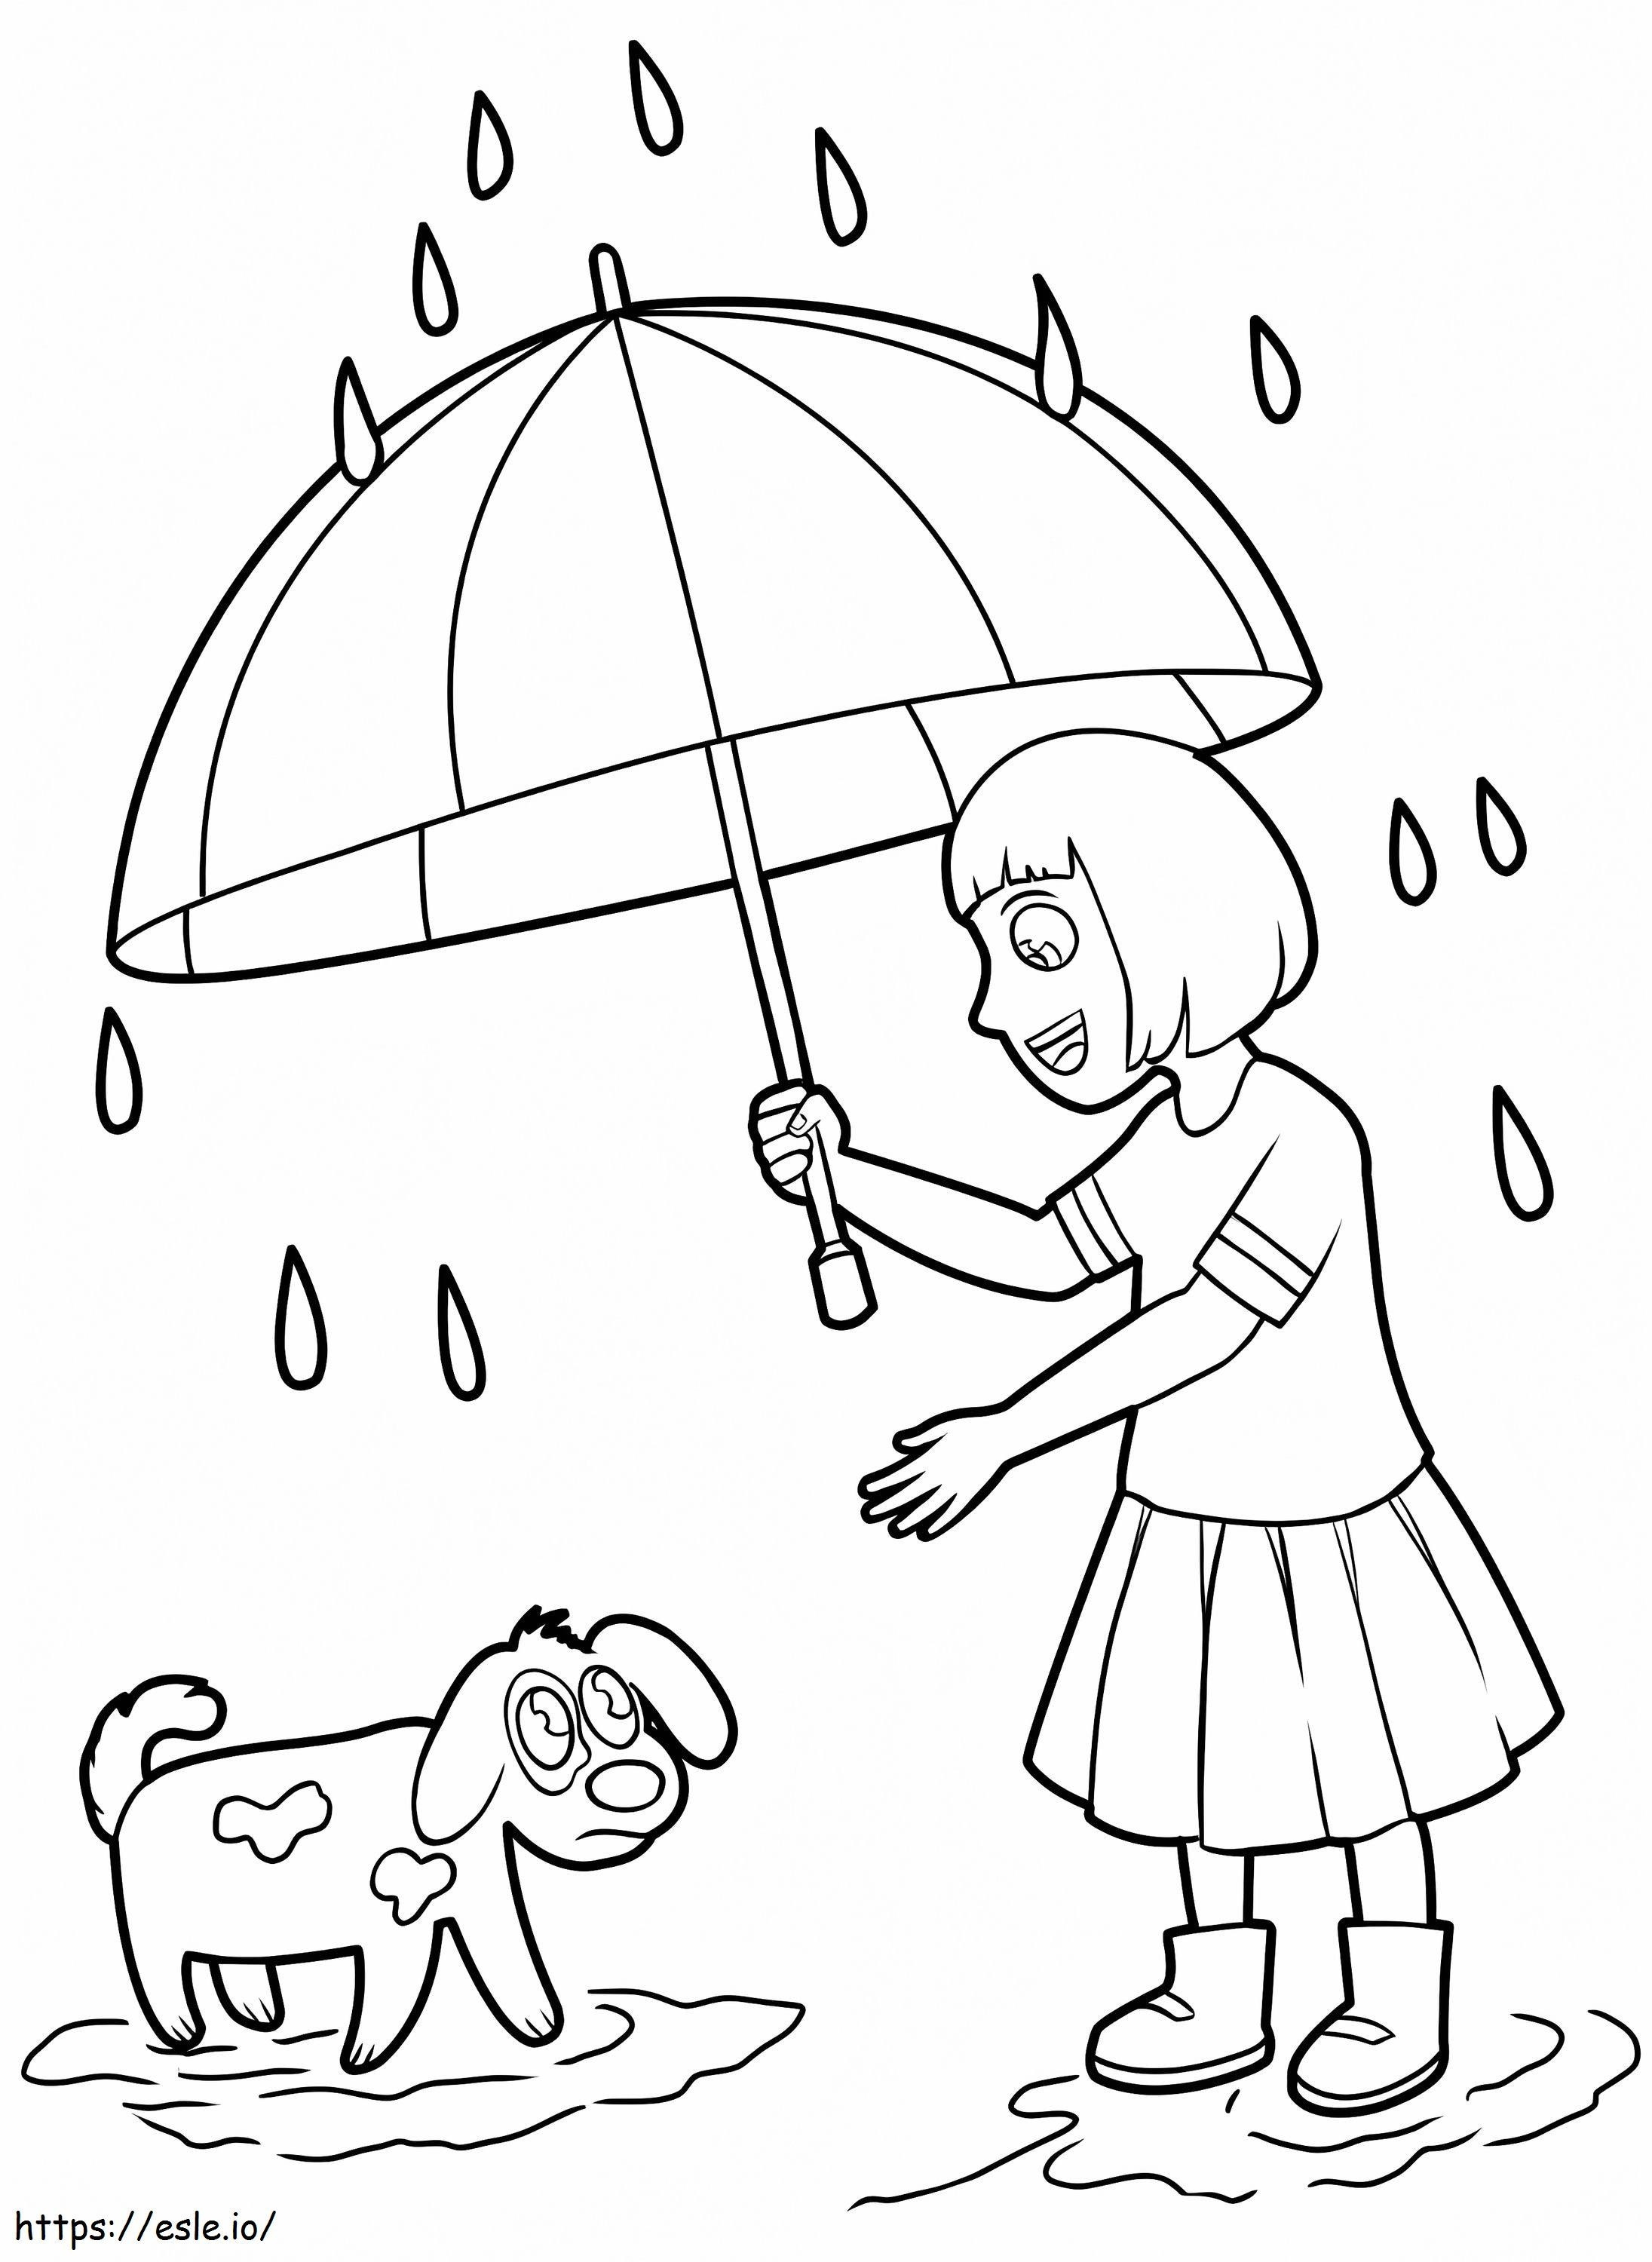 Print Kindness coloring page